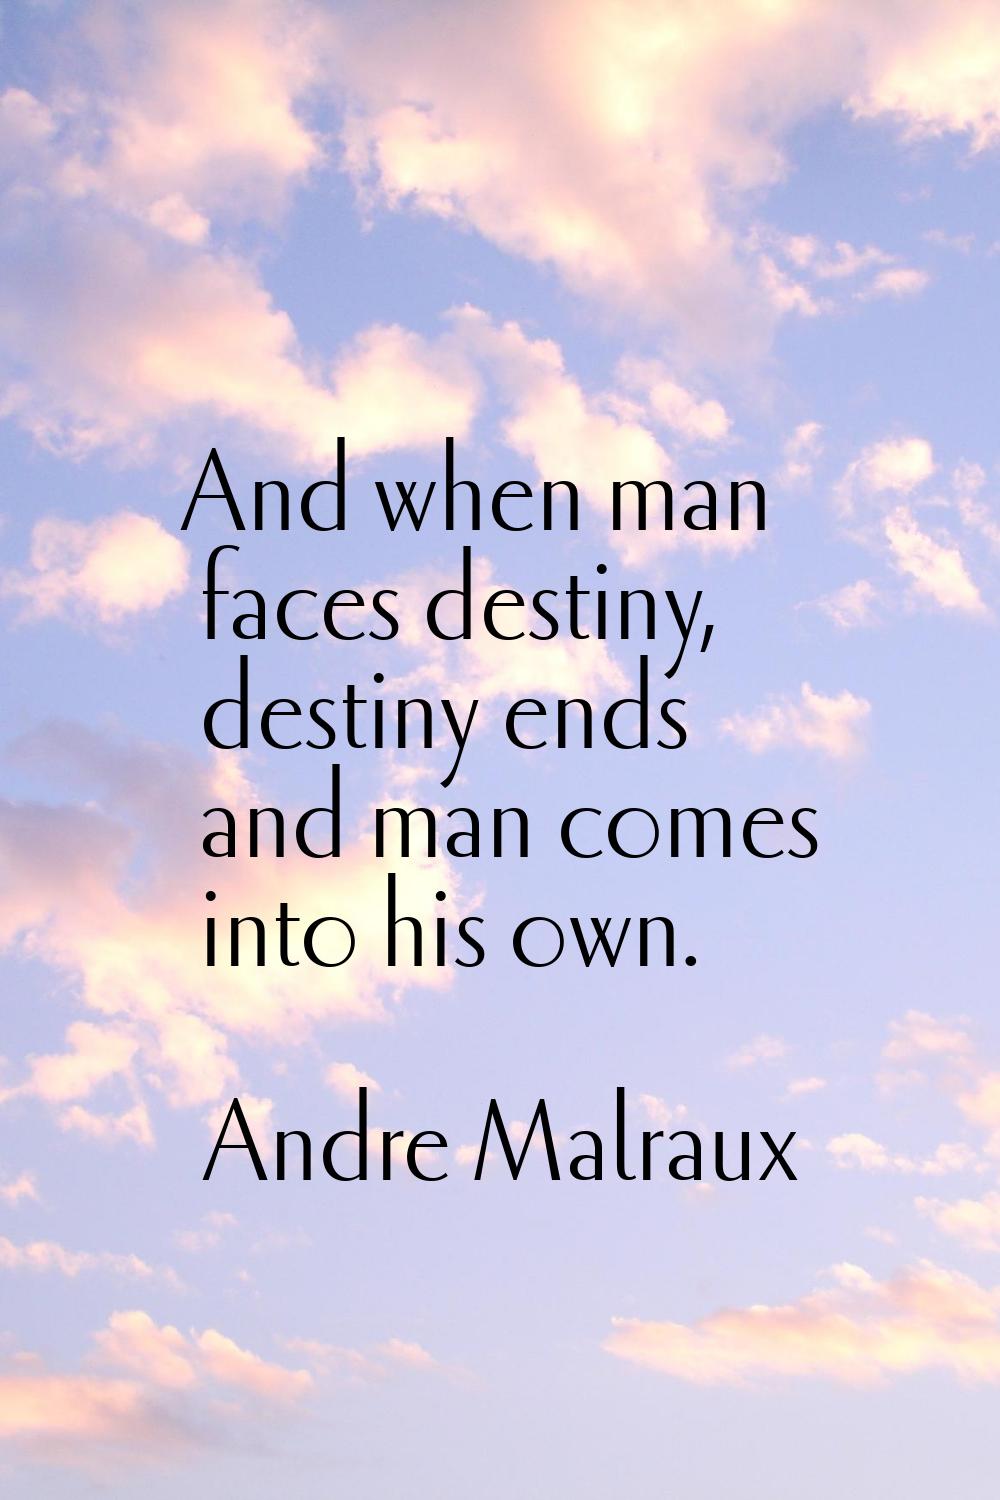 And when man faces destiny, destiny ends and man comes into his own.